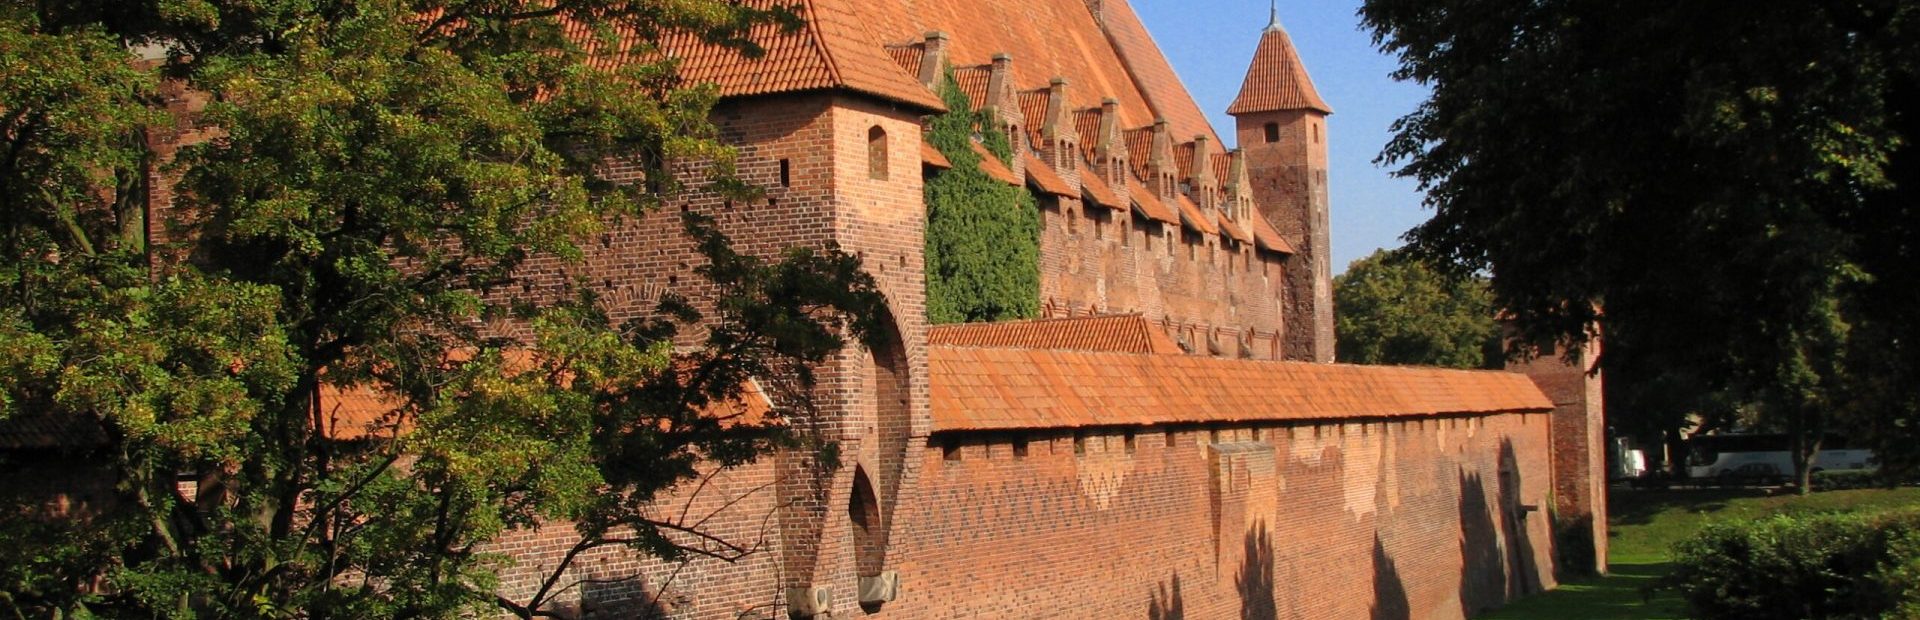 The Castle of the Teutonic Knights in Malbork